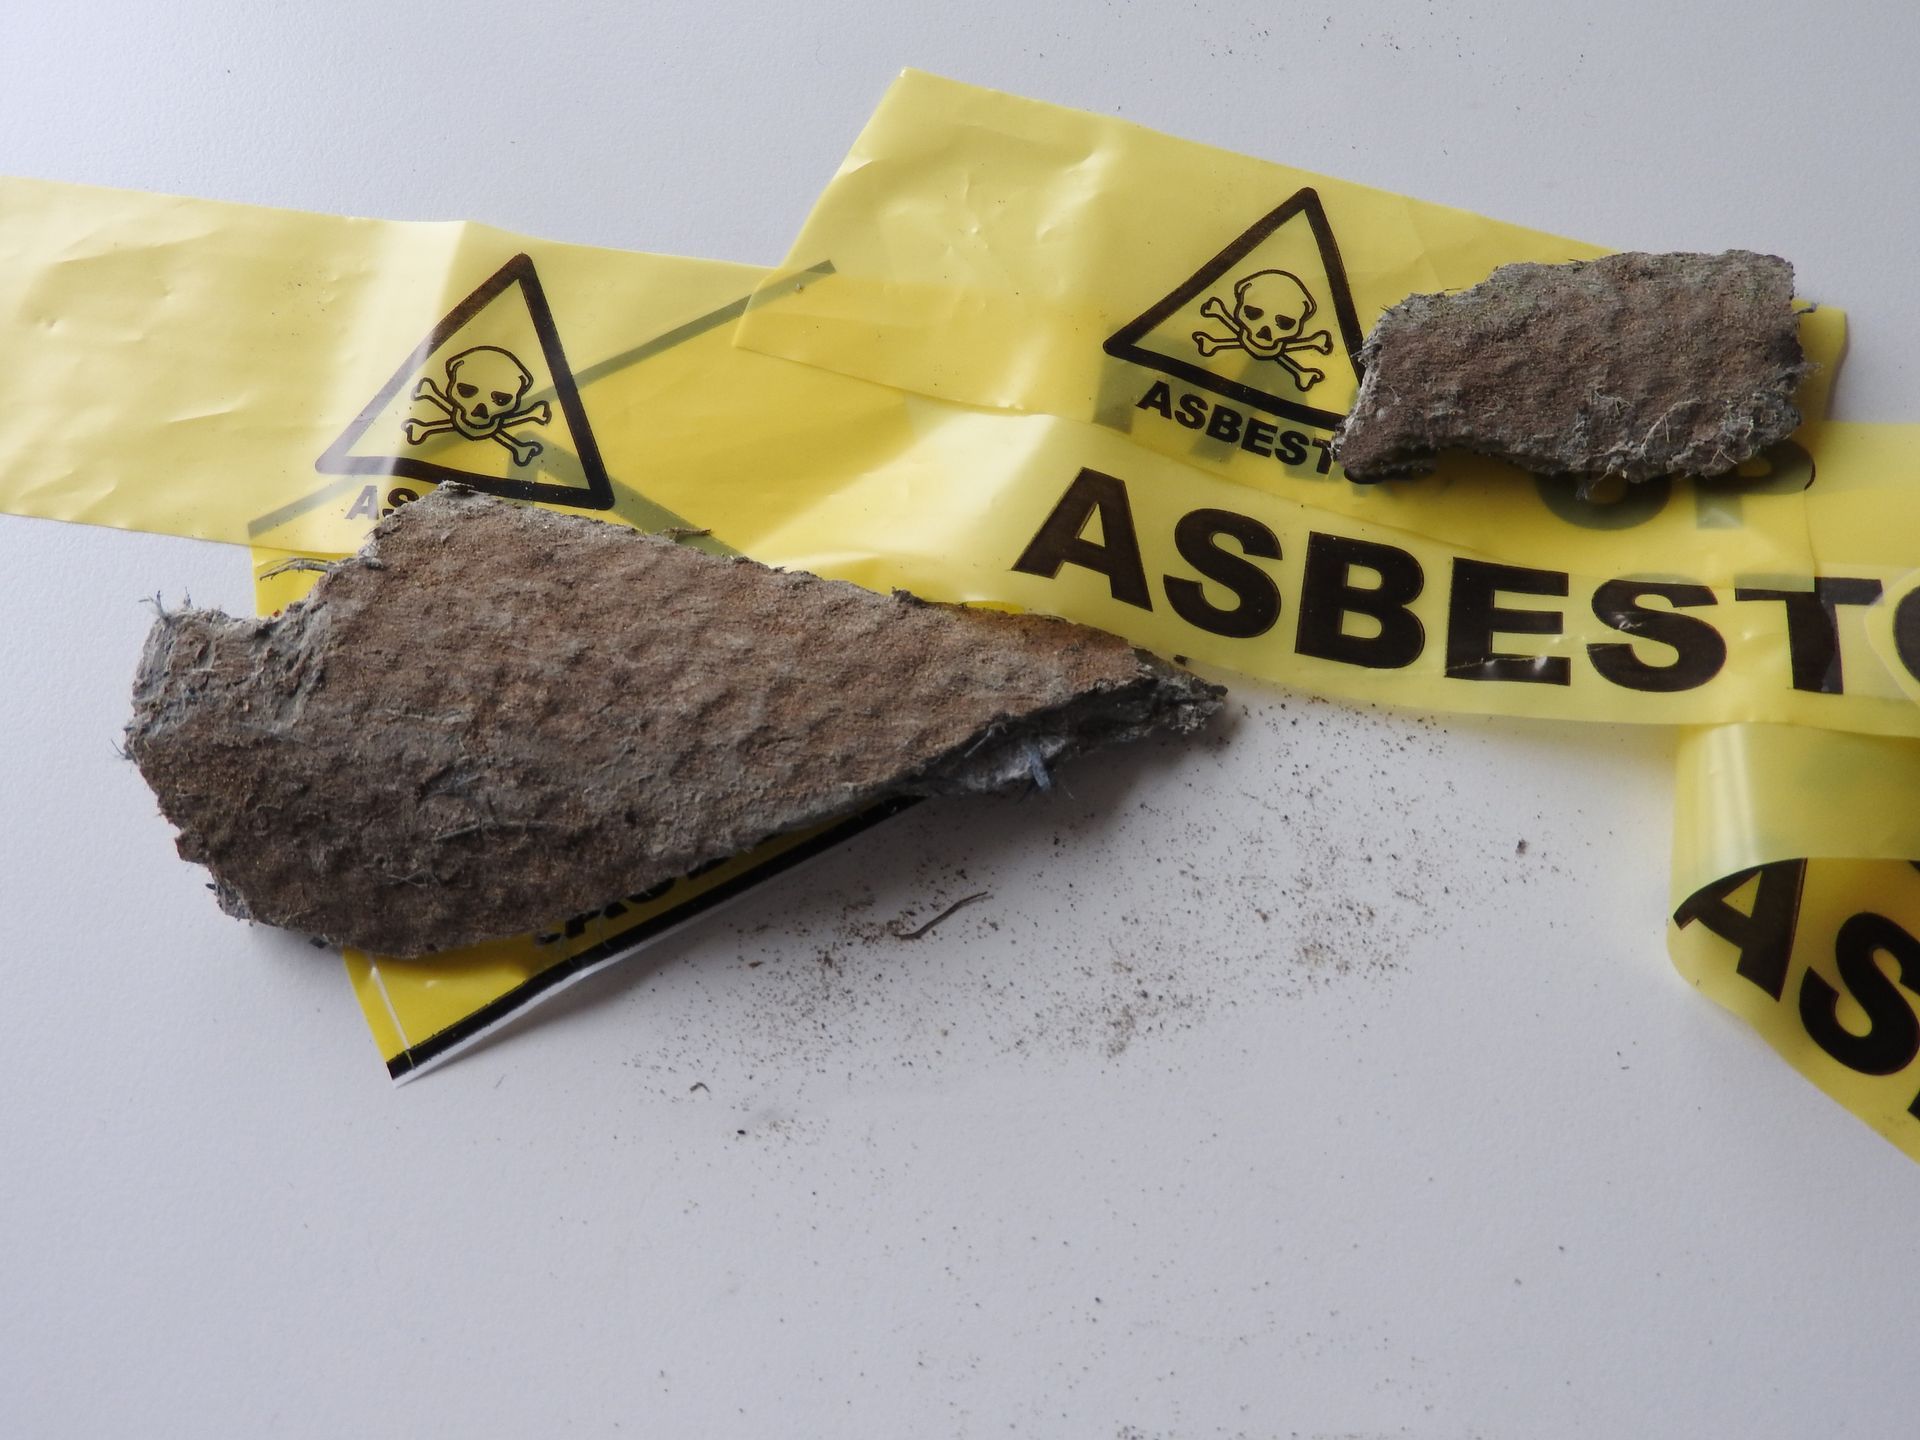 A piece of asbestos is laying on top of a yellow asbestos bag